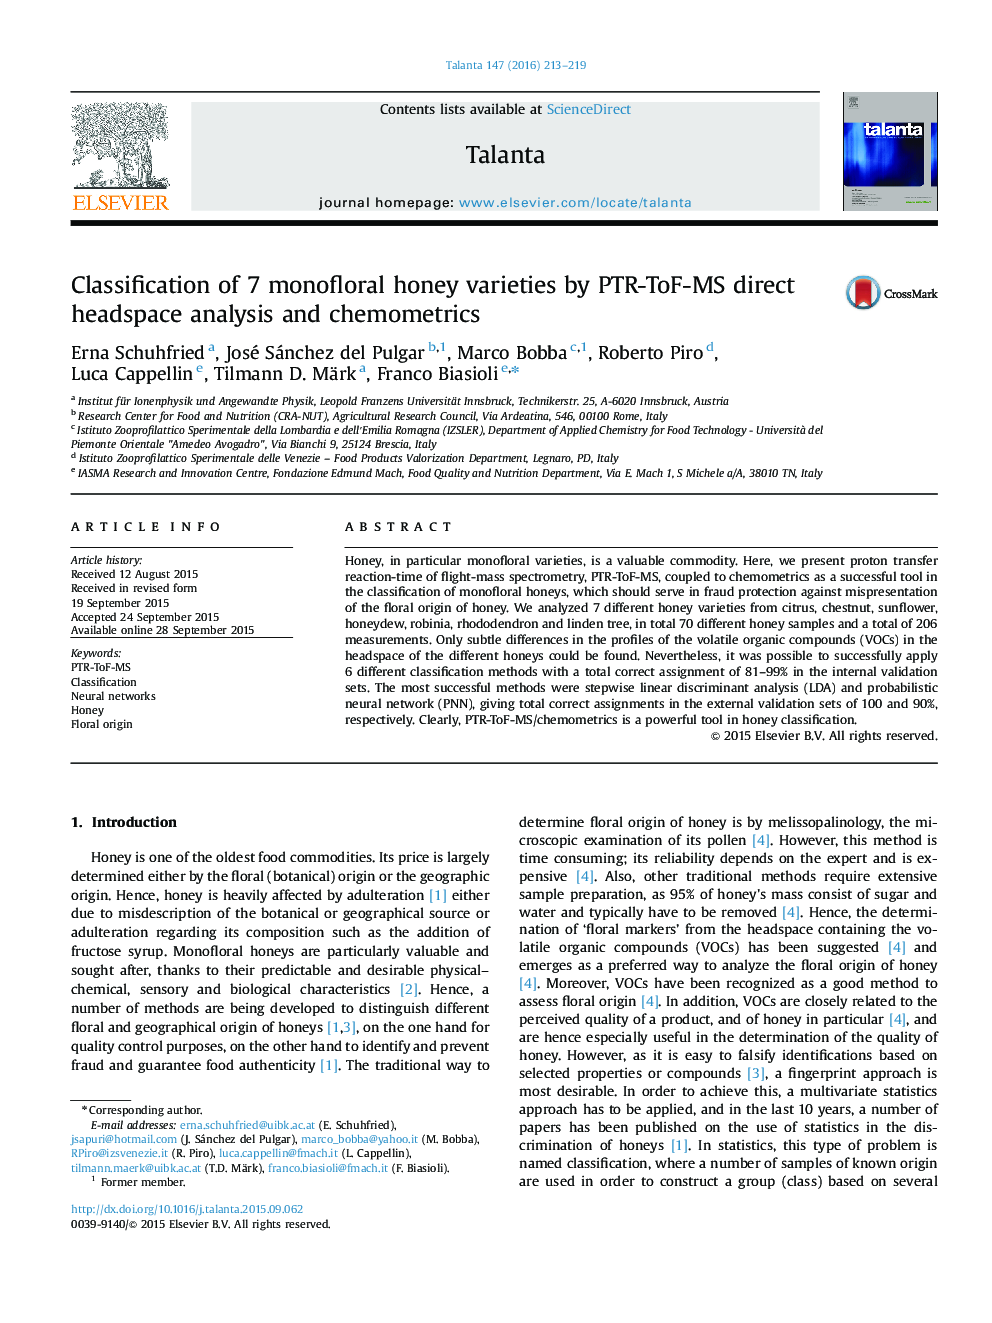 Classification of 7 monofloral honey varieties by PTR-ToF-MS direct headspace analysis and chemometrics